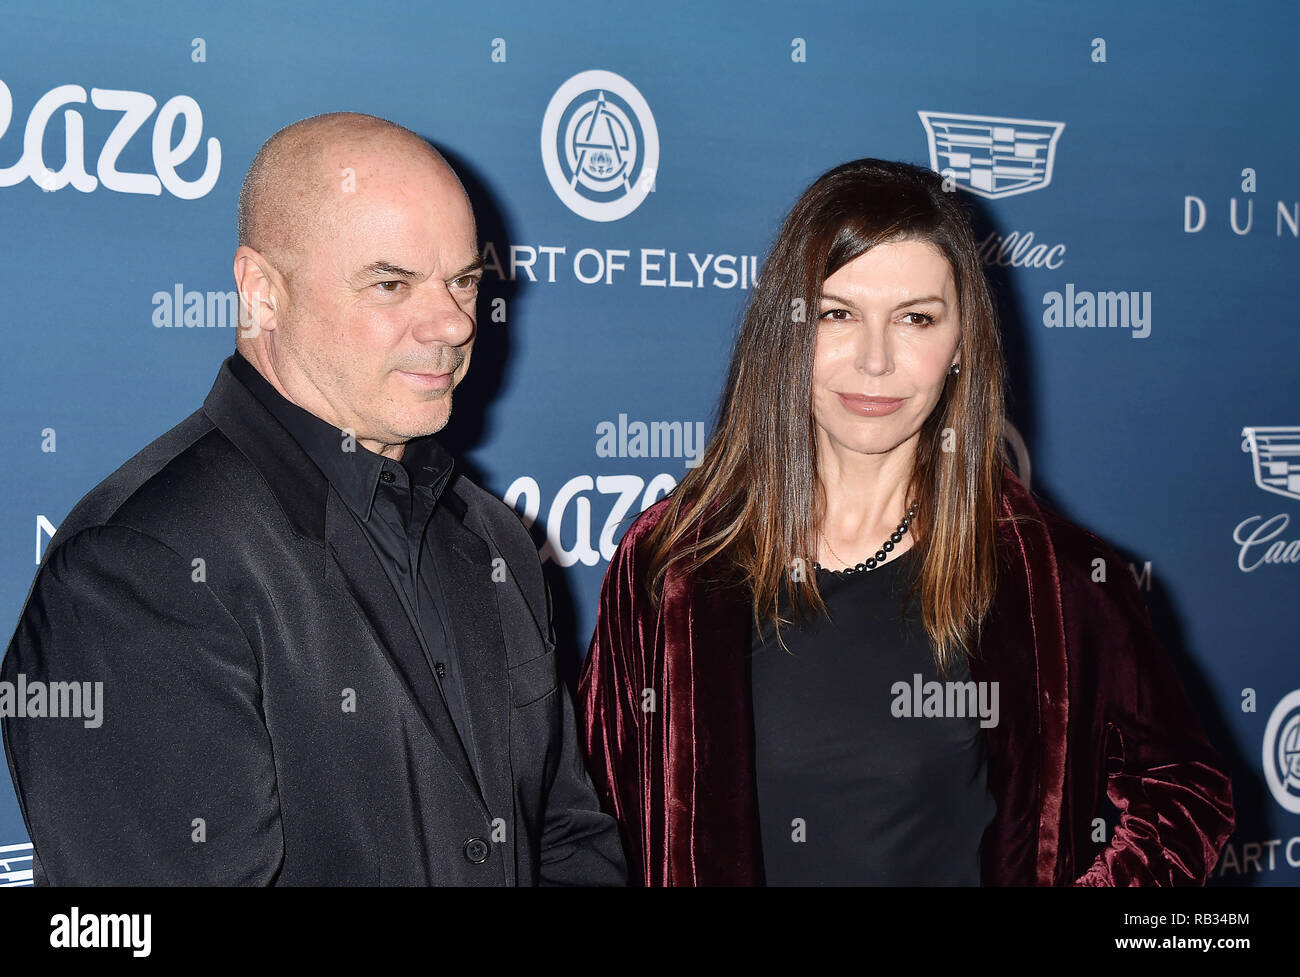 Los Angeles, USA. 5 January 2019. Russell Young (L) and Finola Hughes attend Michael Muller's HEAVEN, presented by The Art of Elysium at a private venue on January 5, 2019 in Los Angeles, California. Credit: Jeffrey Mayer/Alamy Live News Stock Photo